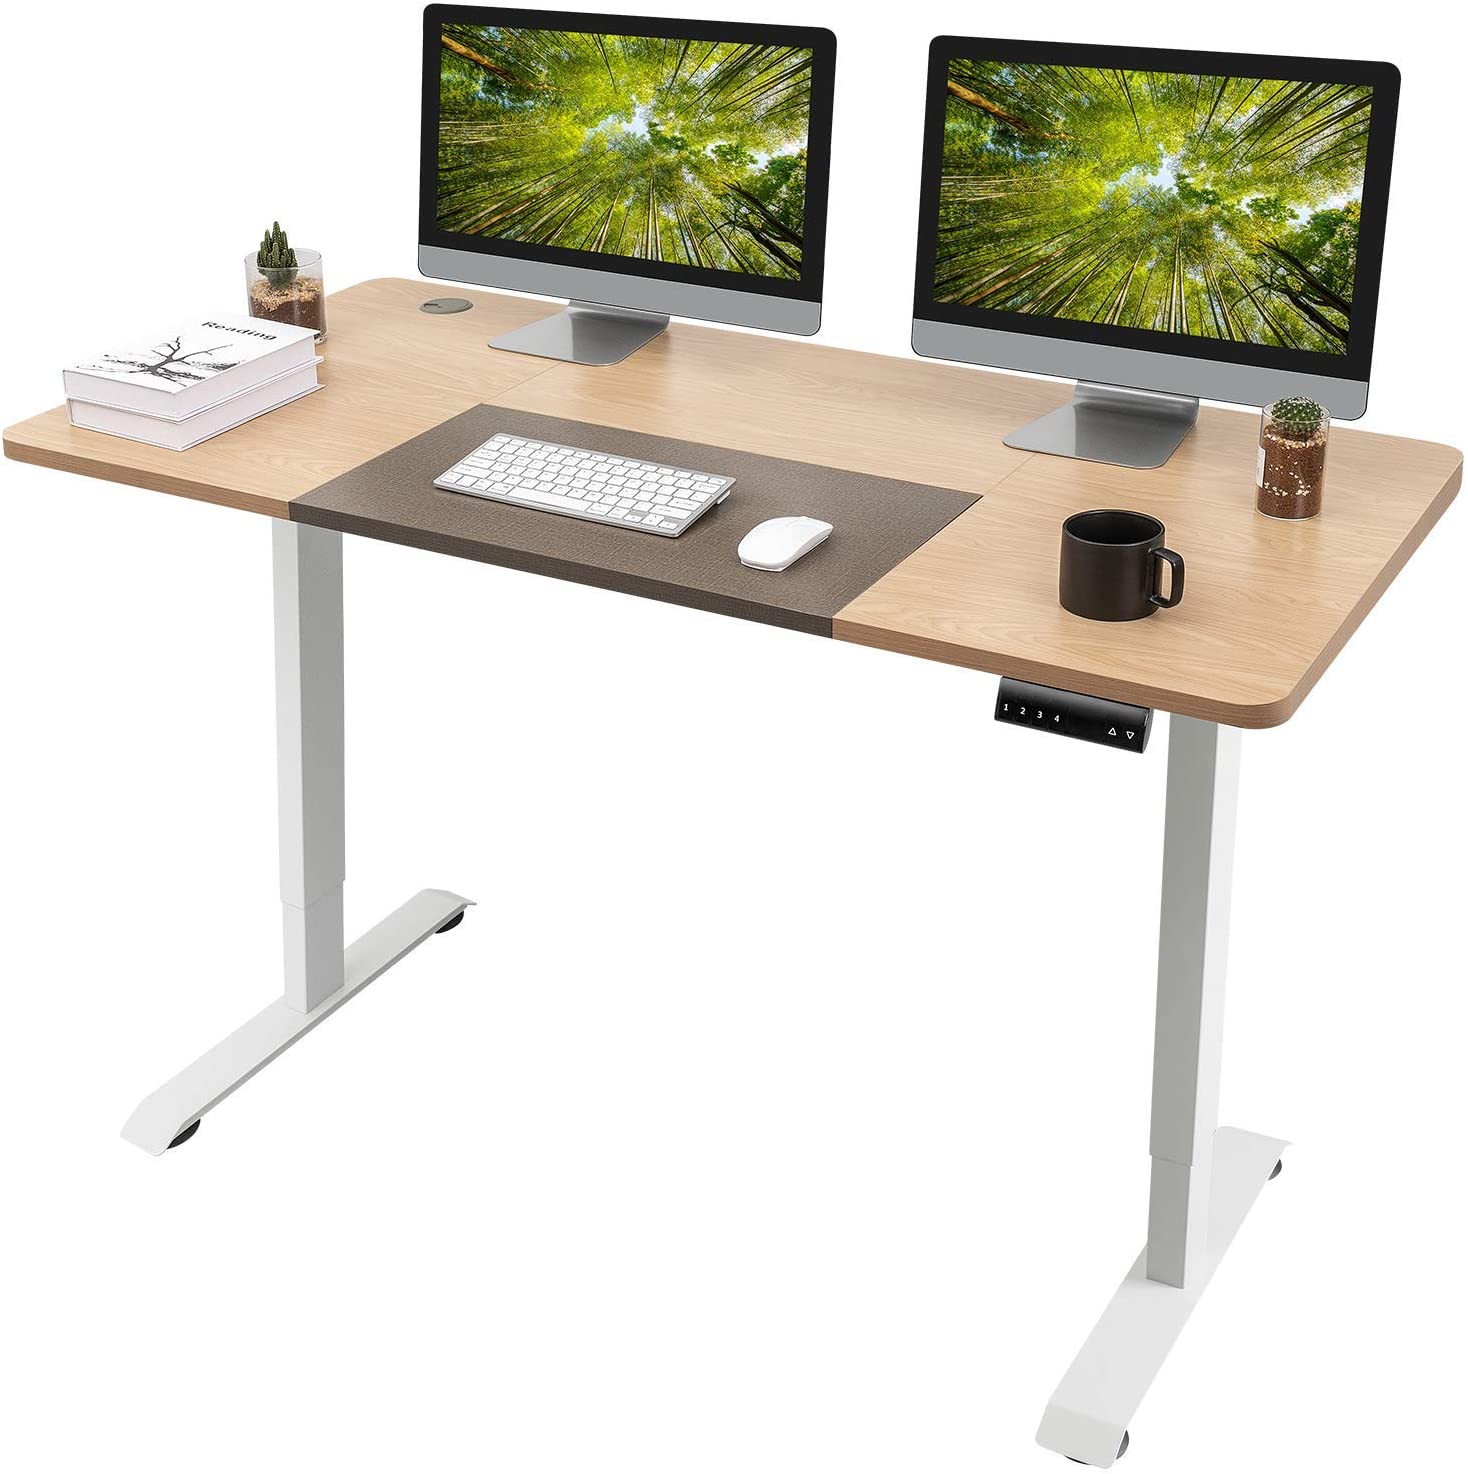 T Shaped Standing Desk Electric Standing Desks: Which Type Is the Right One for Your Home Office? - 10